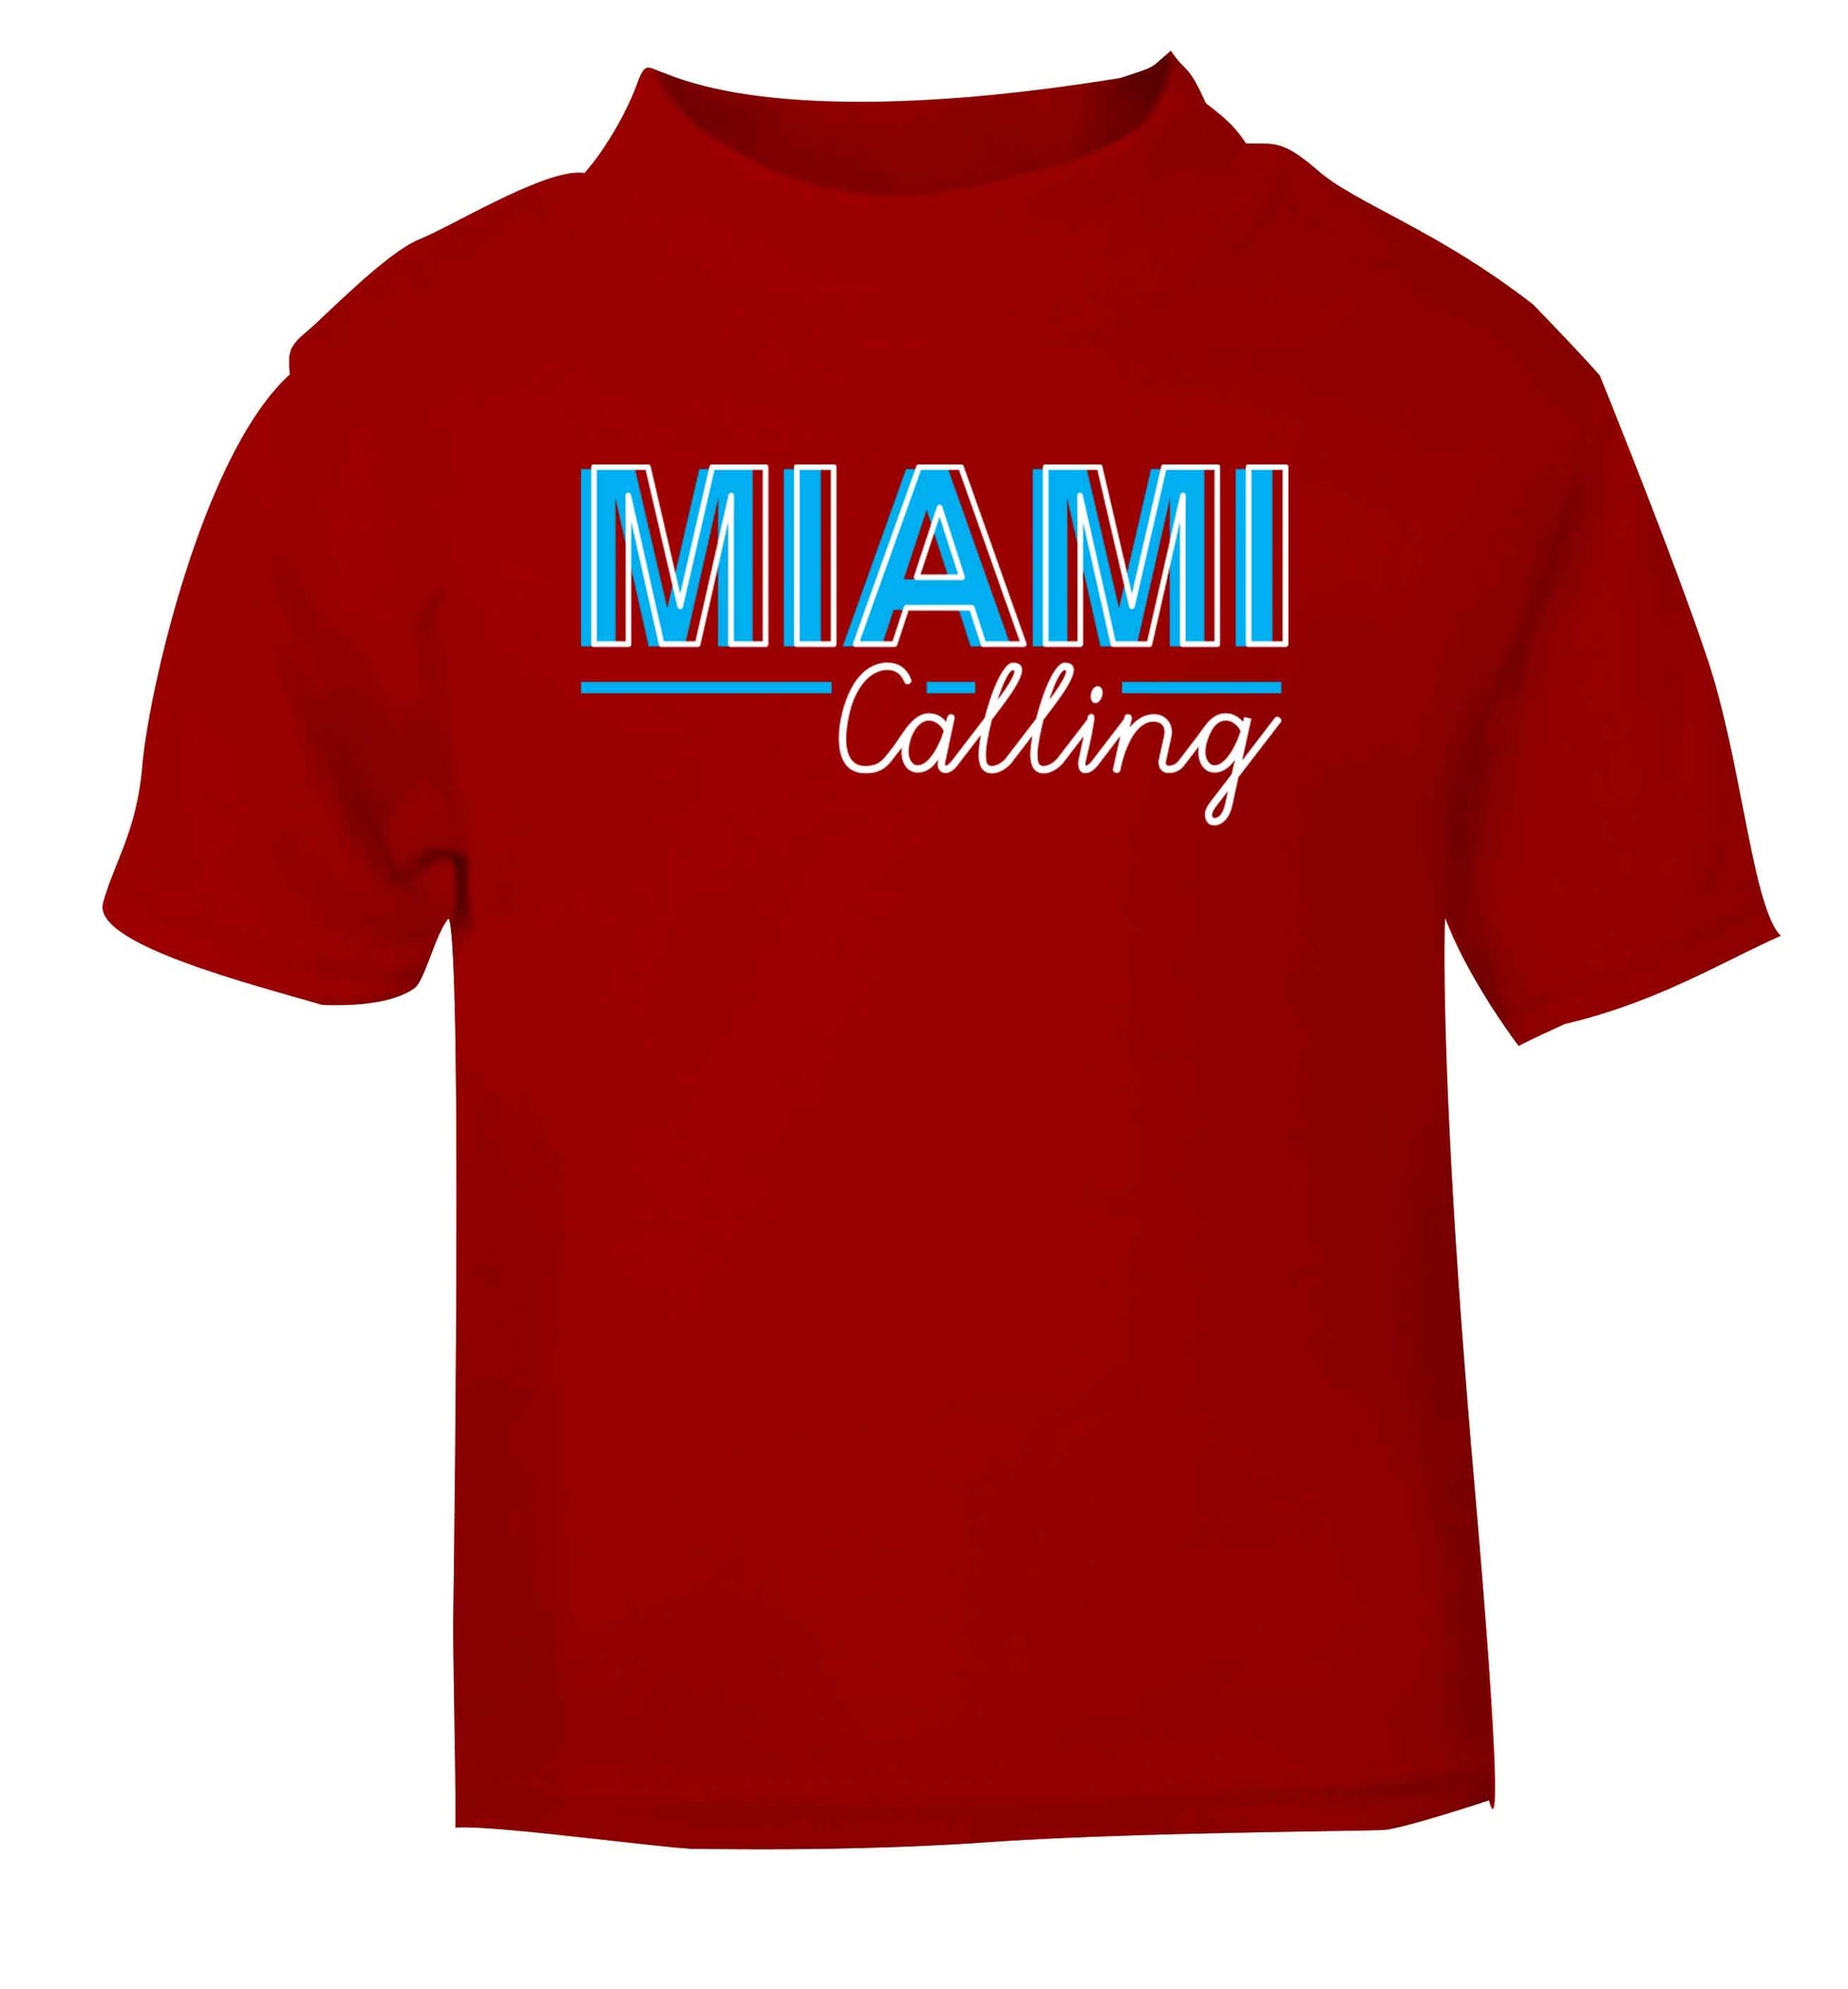 Miami calling red Baby Toddler Tshirt 2 Years